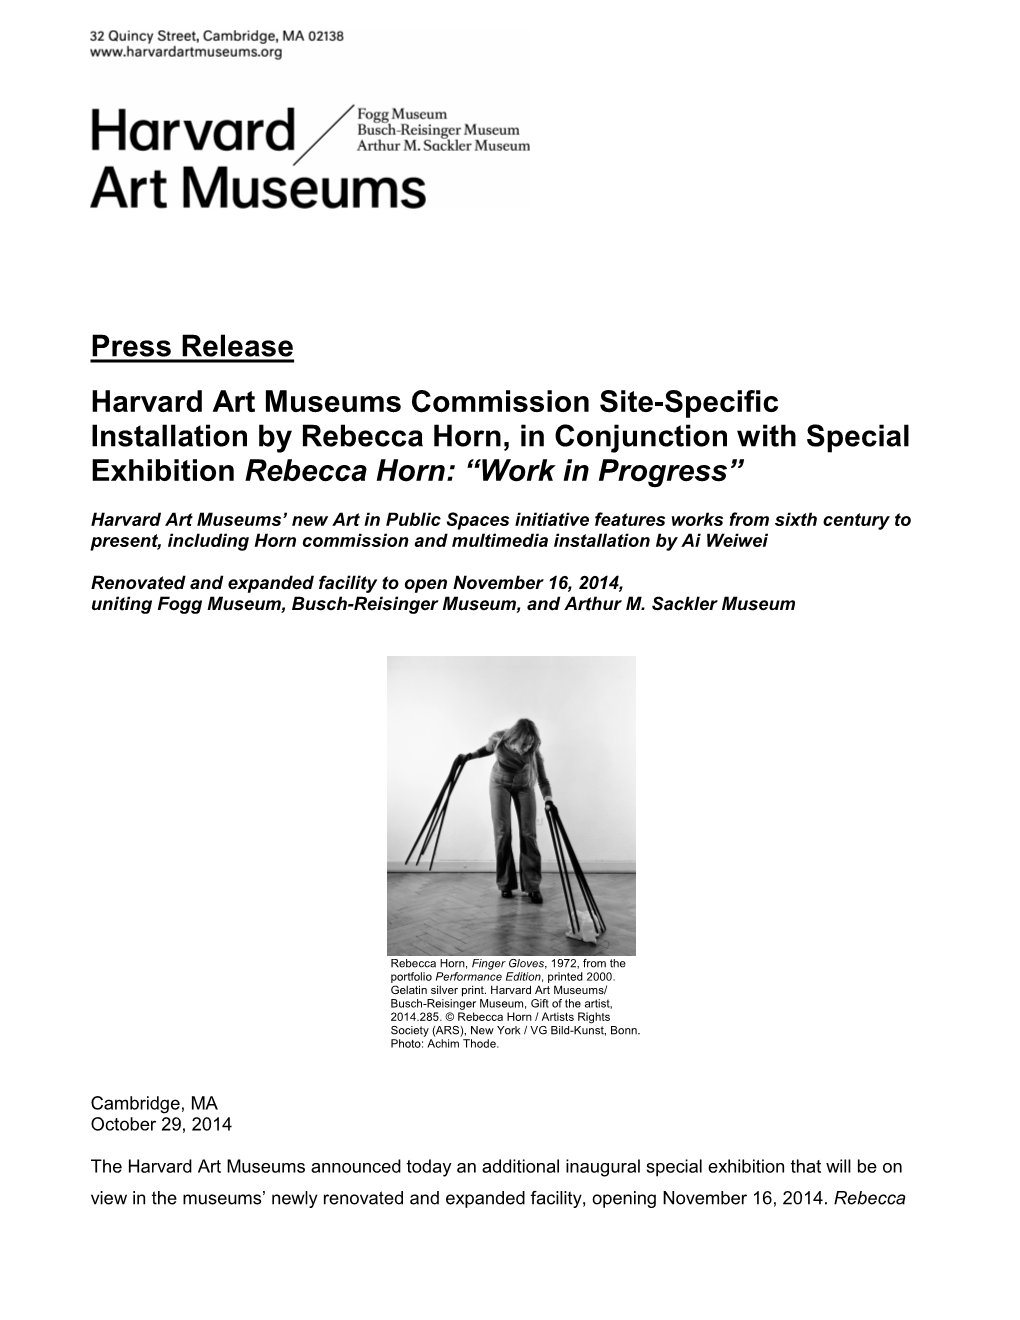 Press Release Harvard Art Museums Commission Site-Specific